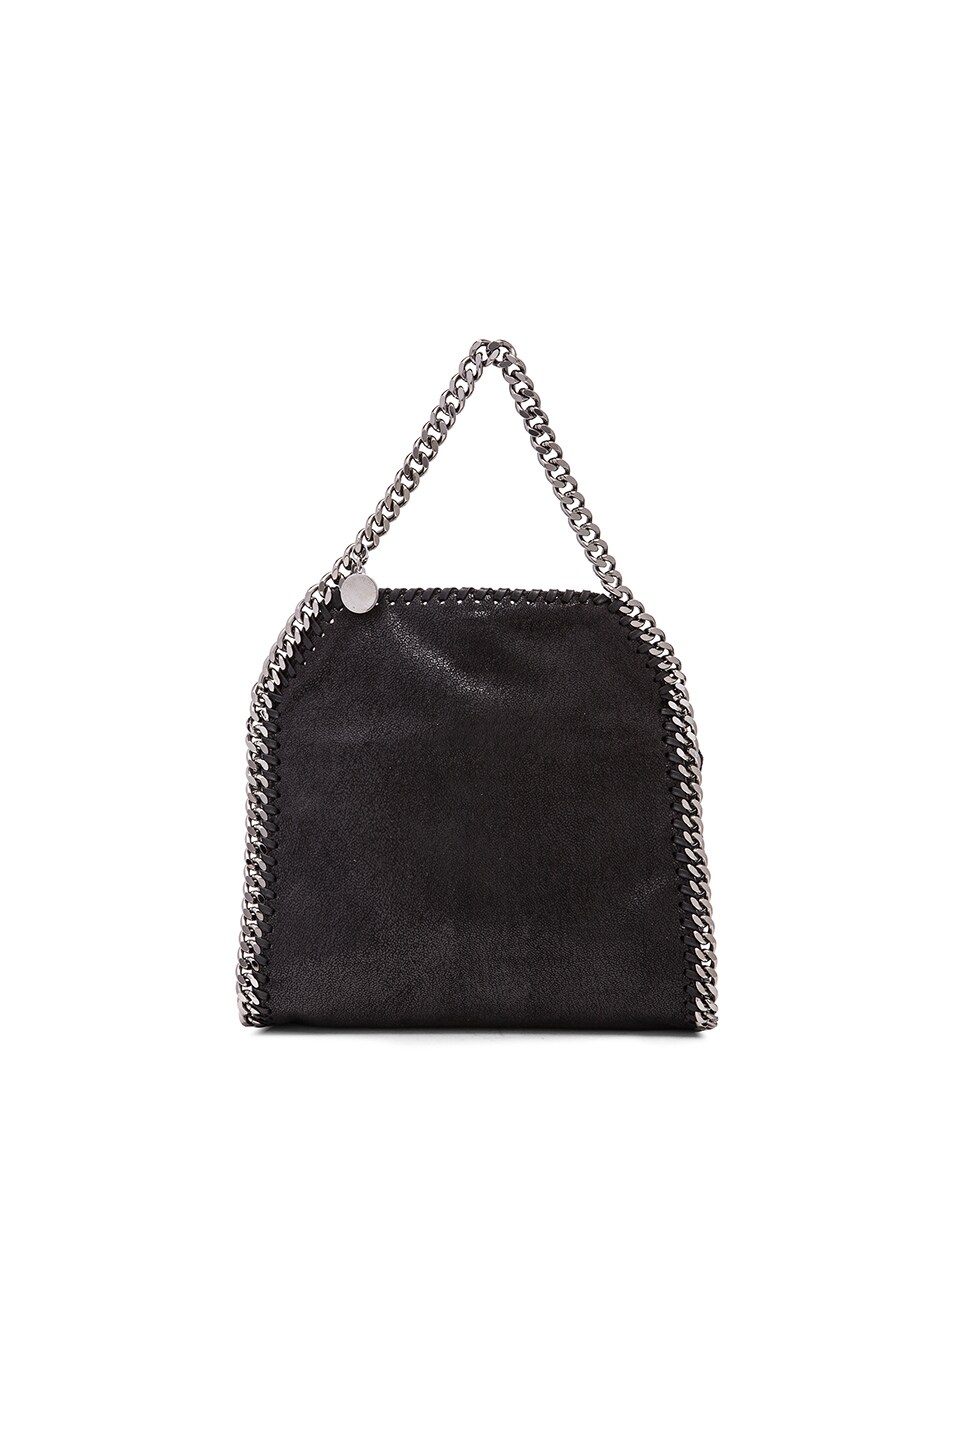 Image 1 of Stella McCartney Falabella Shaggy Deer Tiny Tote in Black